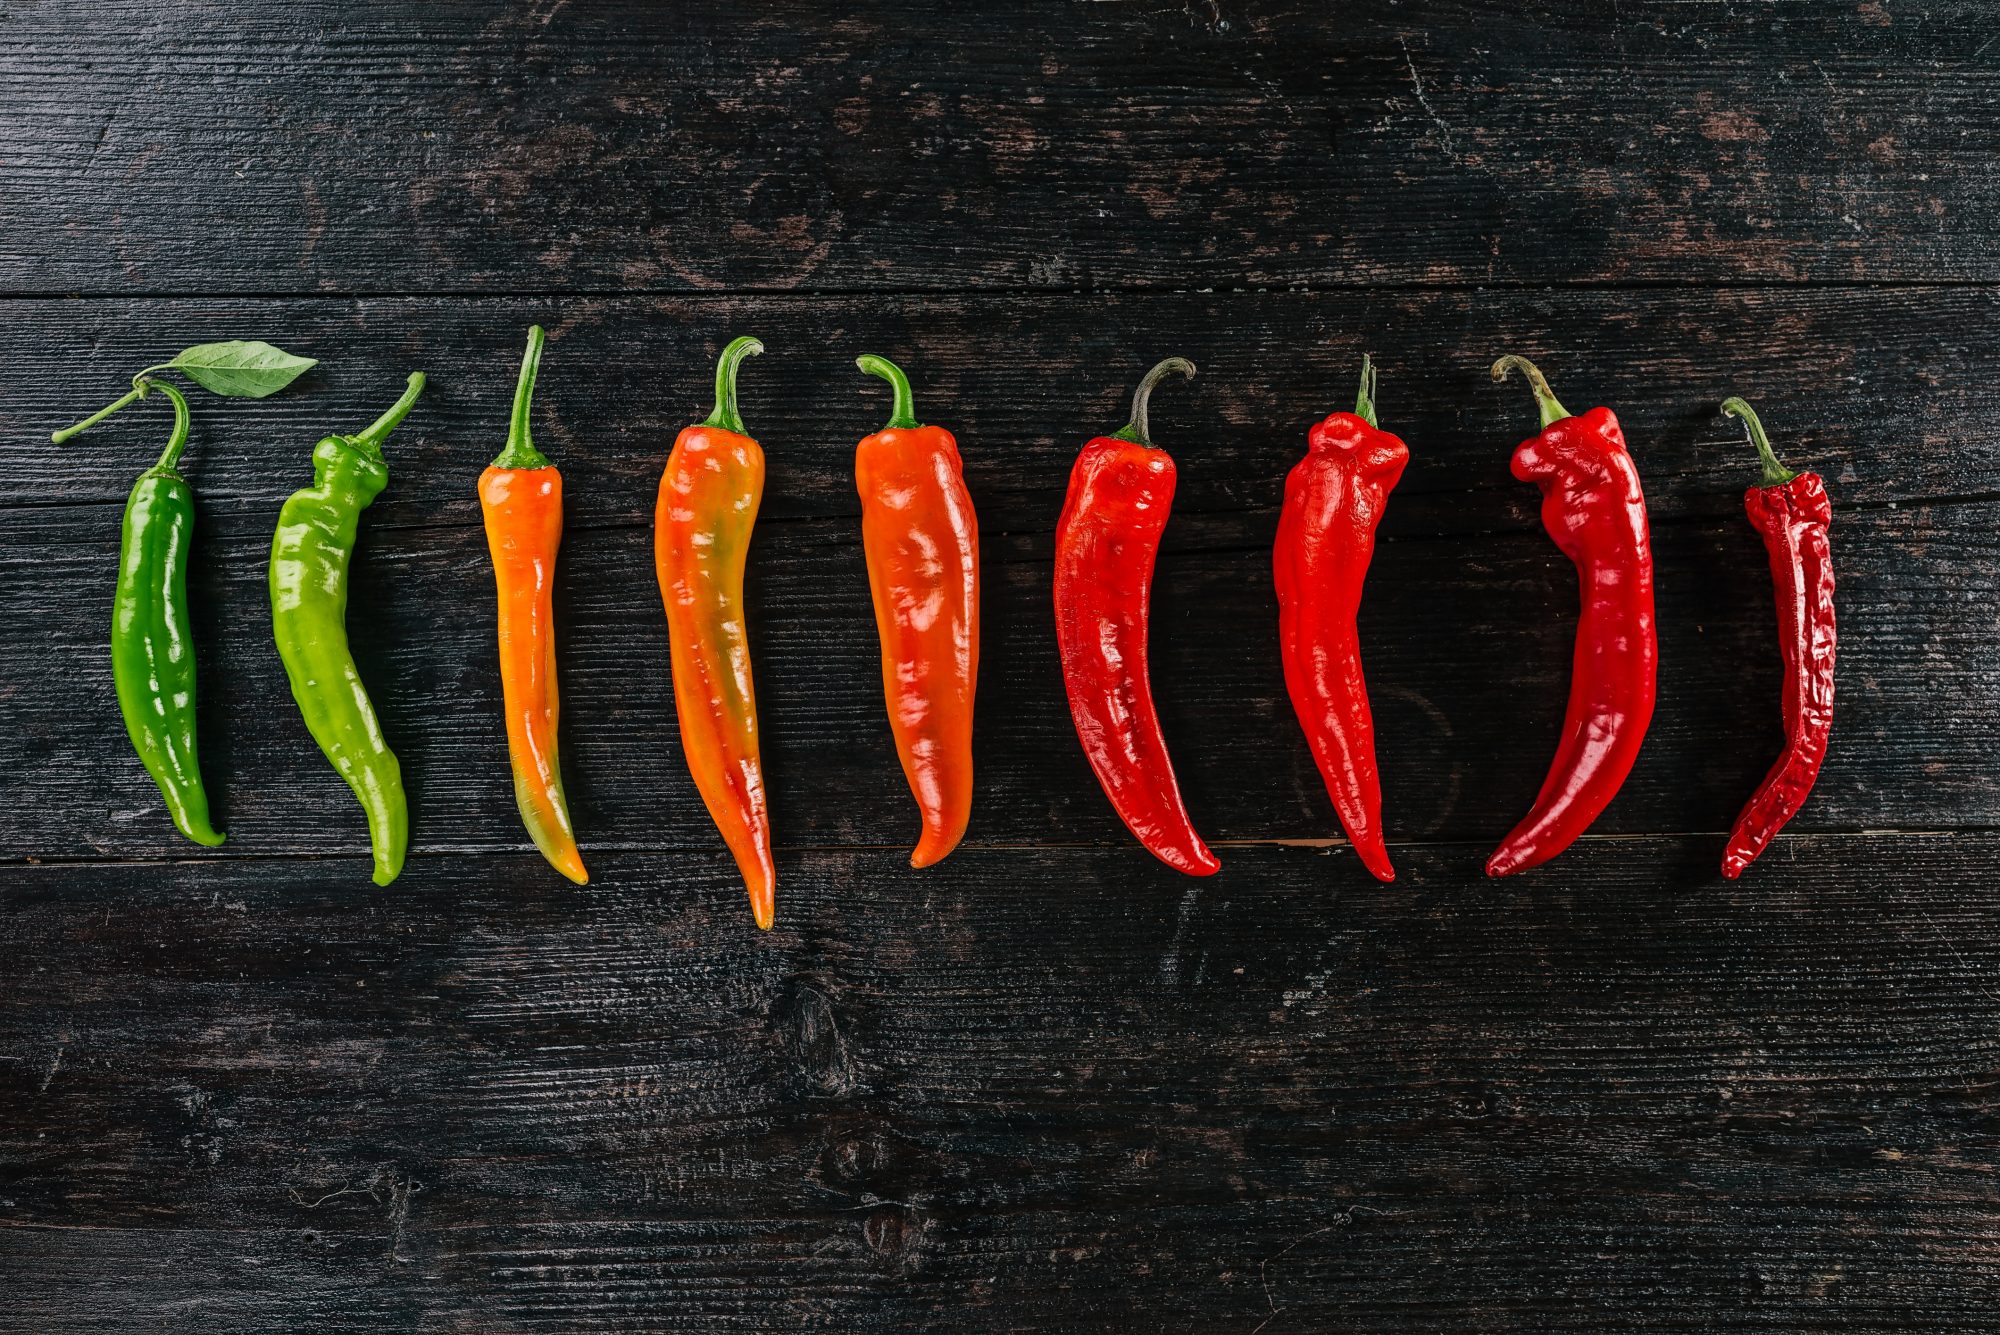 https://static.onecms.io/wp-content/uploads/sites/19/2019/08/14/scoville-2000.jpg